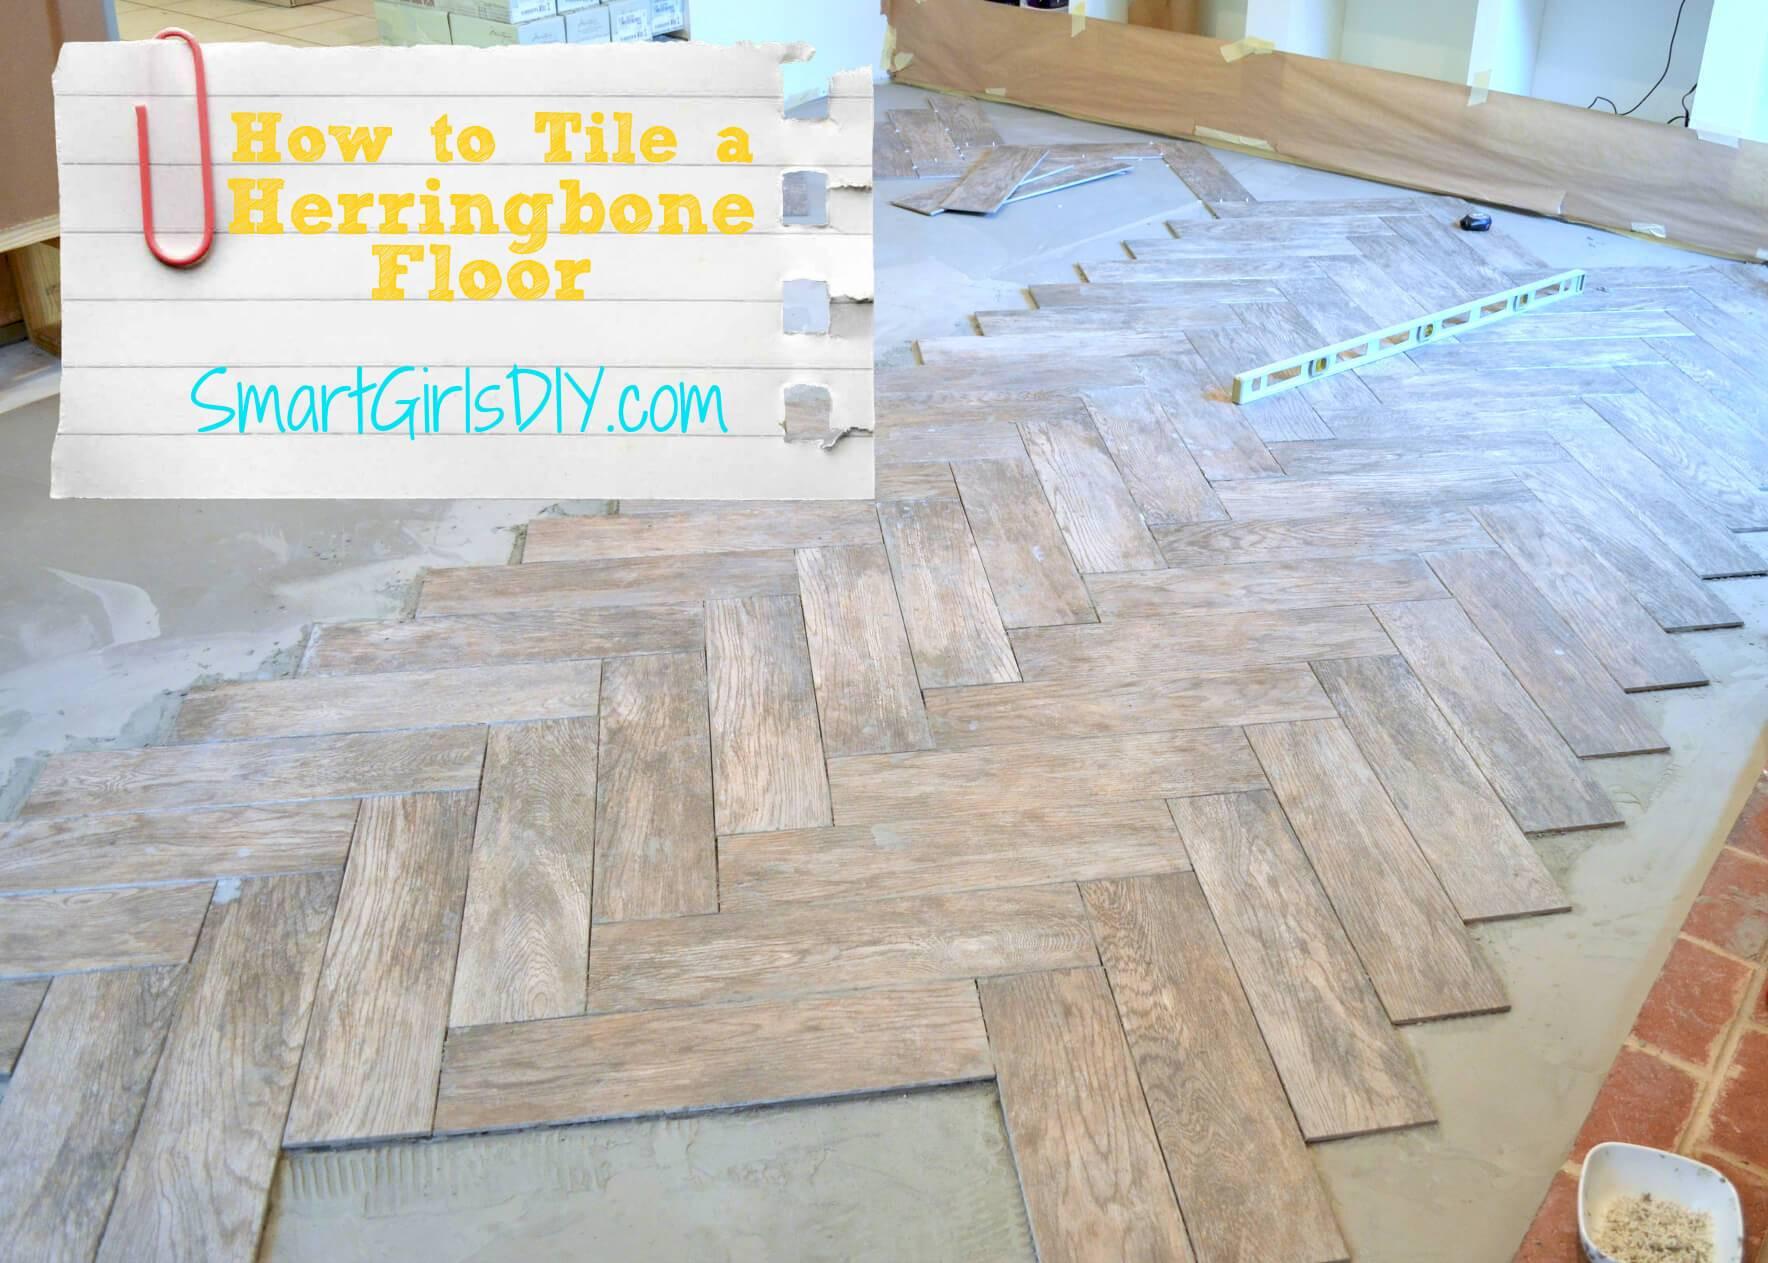 15 Stunning How Do You Install Hardwood Floors On A Concrete Slab 2024 free download how do you install hardwood floors on a concrete slab of how to tile a herringbone floor family room 10 in how to tile a herringbone floor yourself